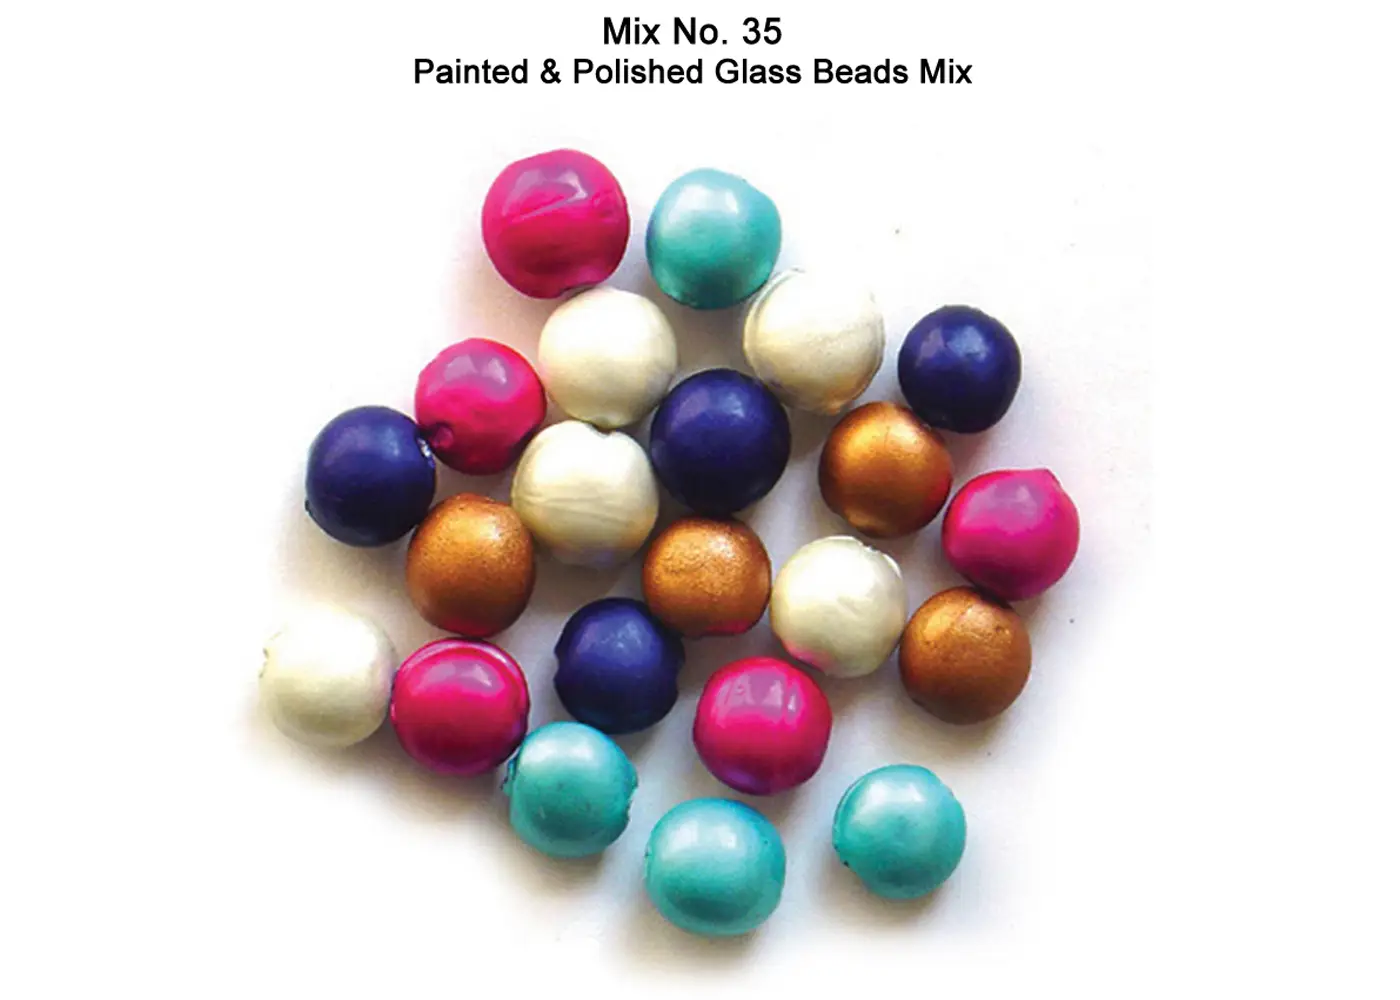 Painted and Polished Glass Beads Mix